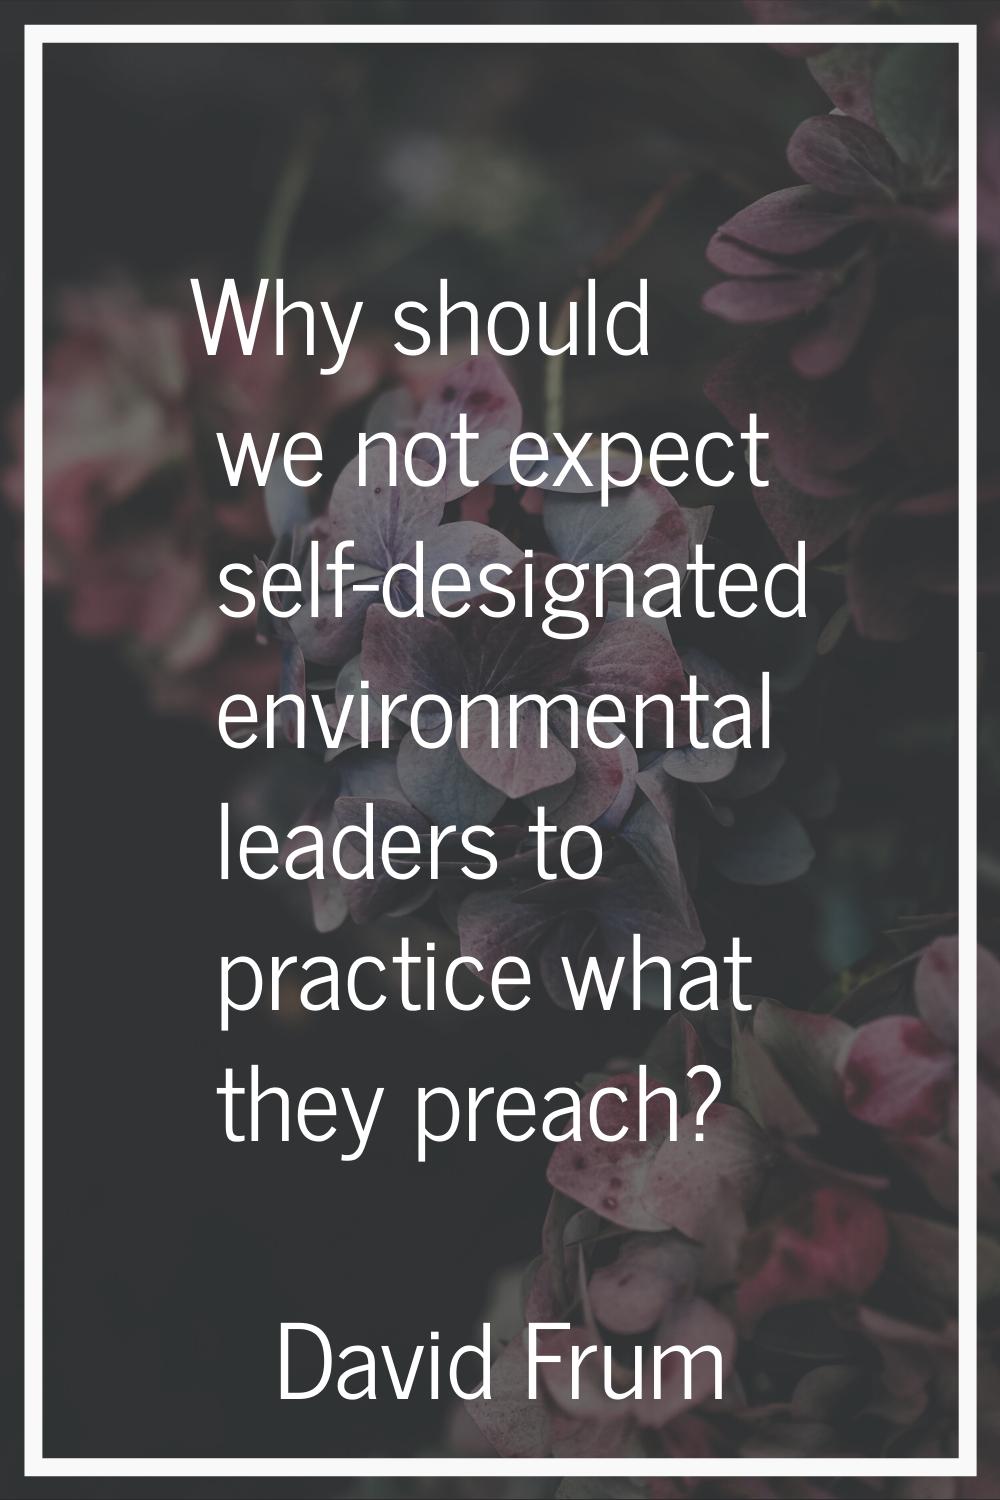 Why should we not expect self-designated environmental leaders to practice what they preach?